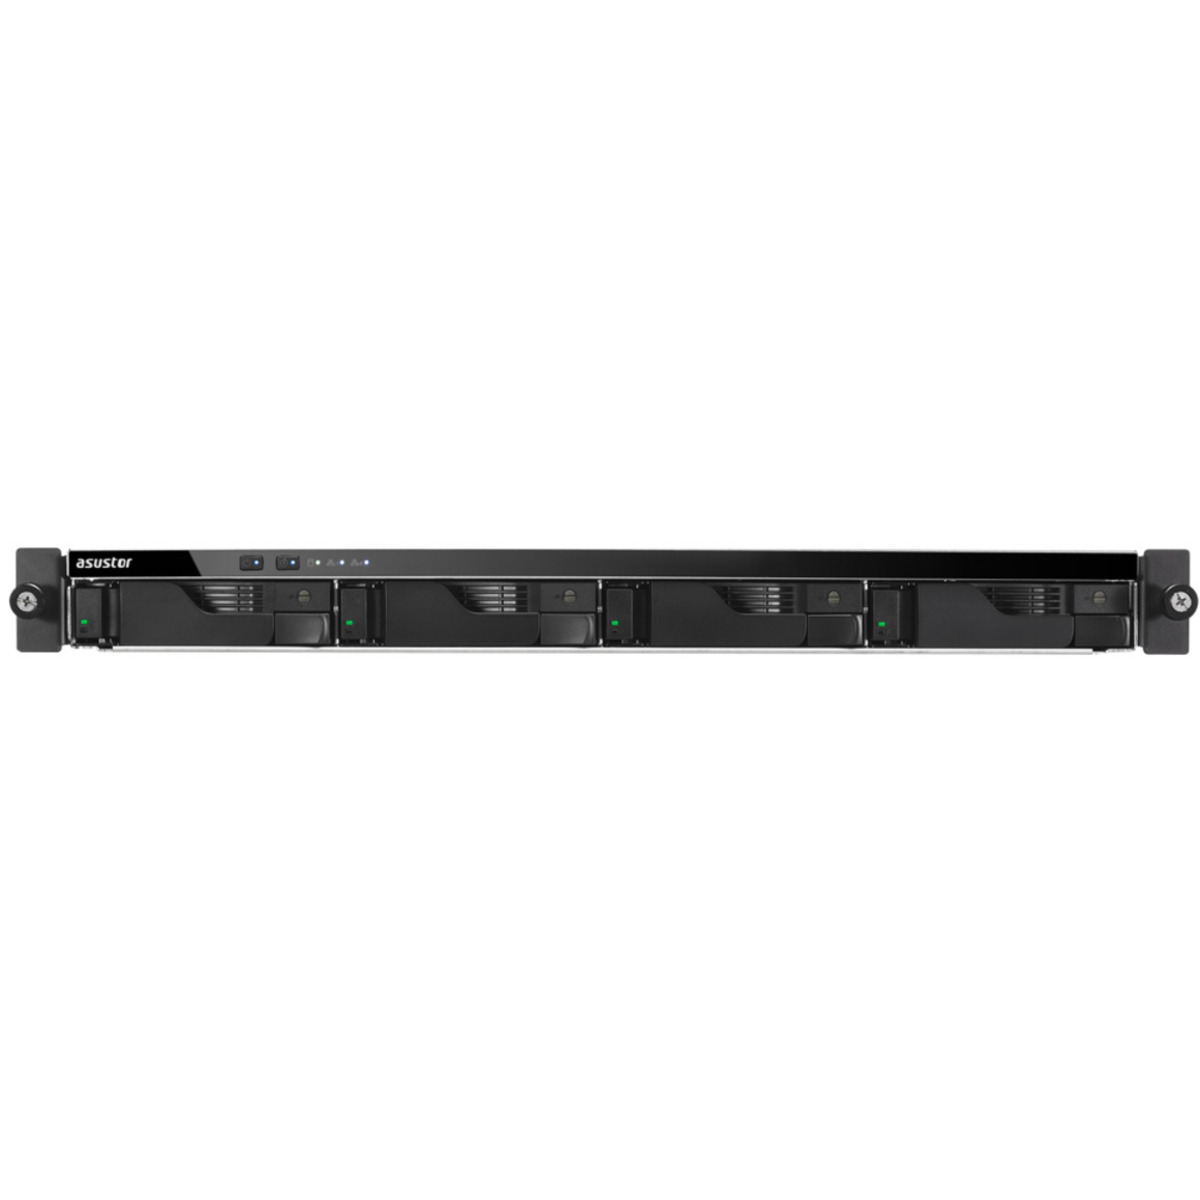 ASUSTOR LOCKERSTOR 4RD AS6504RD 6tb 4-Bay RackMount Multimedia / Power User / Business NAS - Network Attached Storage Device 3x2tb Sandisk Ultra 3D SDSSDH3-2T00 2.5 560/520MB/s SATA 6Gb/s SSD CONSUMER Class Drives Installed - Burn-In Tested - FREE RAM UPGRADE LOCKERSTOR 4RD AS6504RD